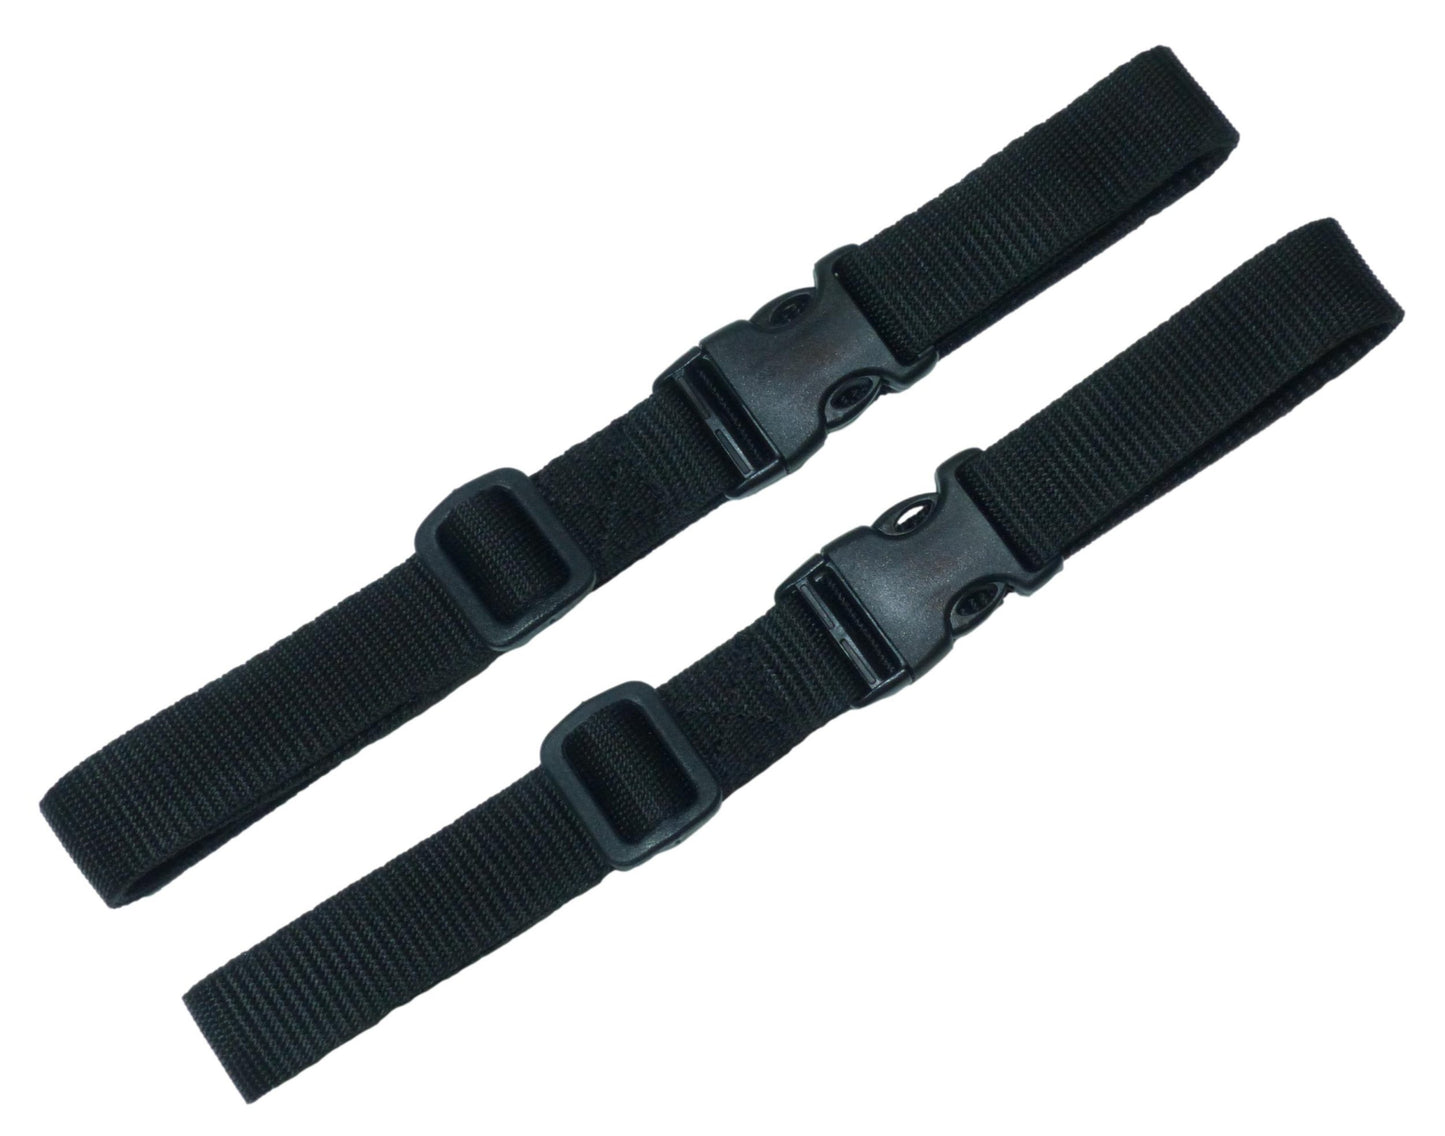 25mm Webbing Strap with Quick Release & Length-Adjusting Buckles (Pair) in black, closed